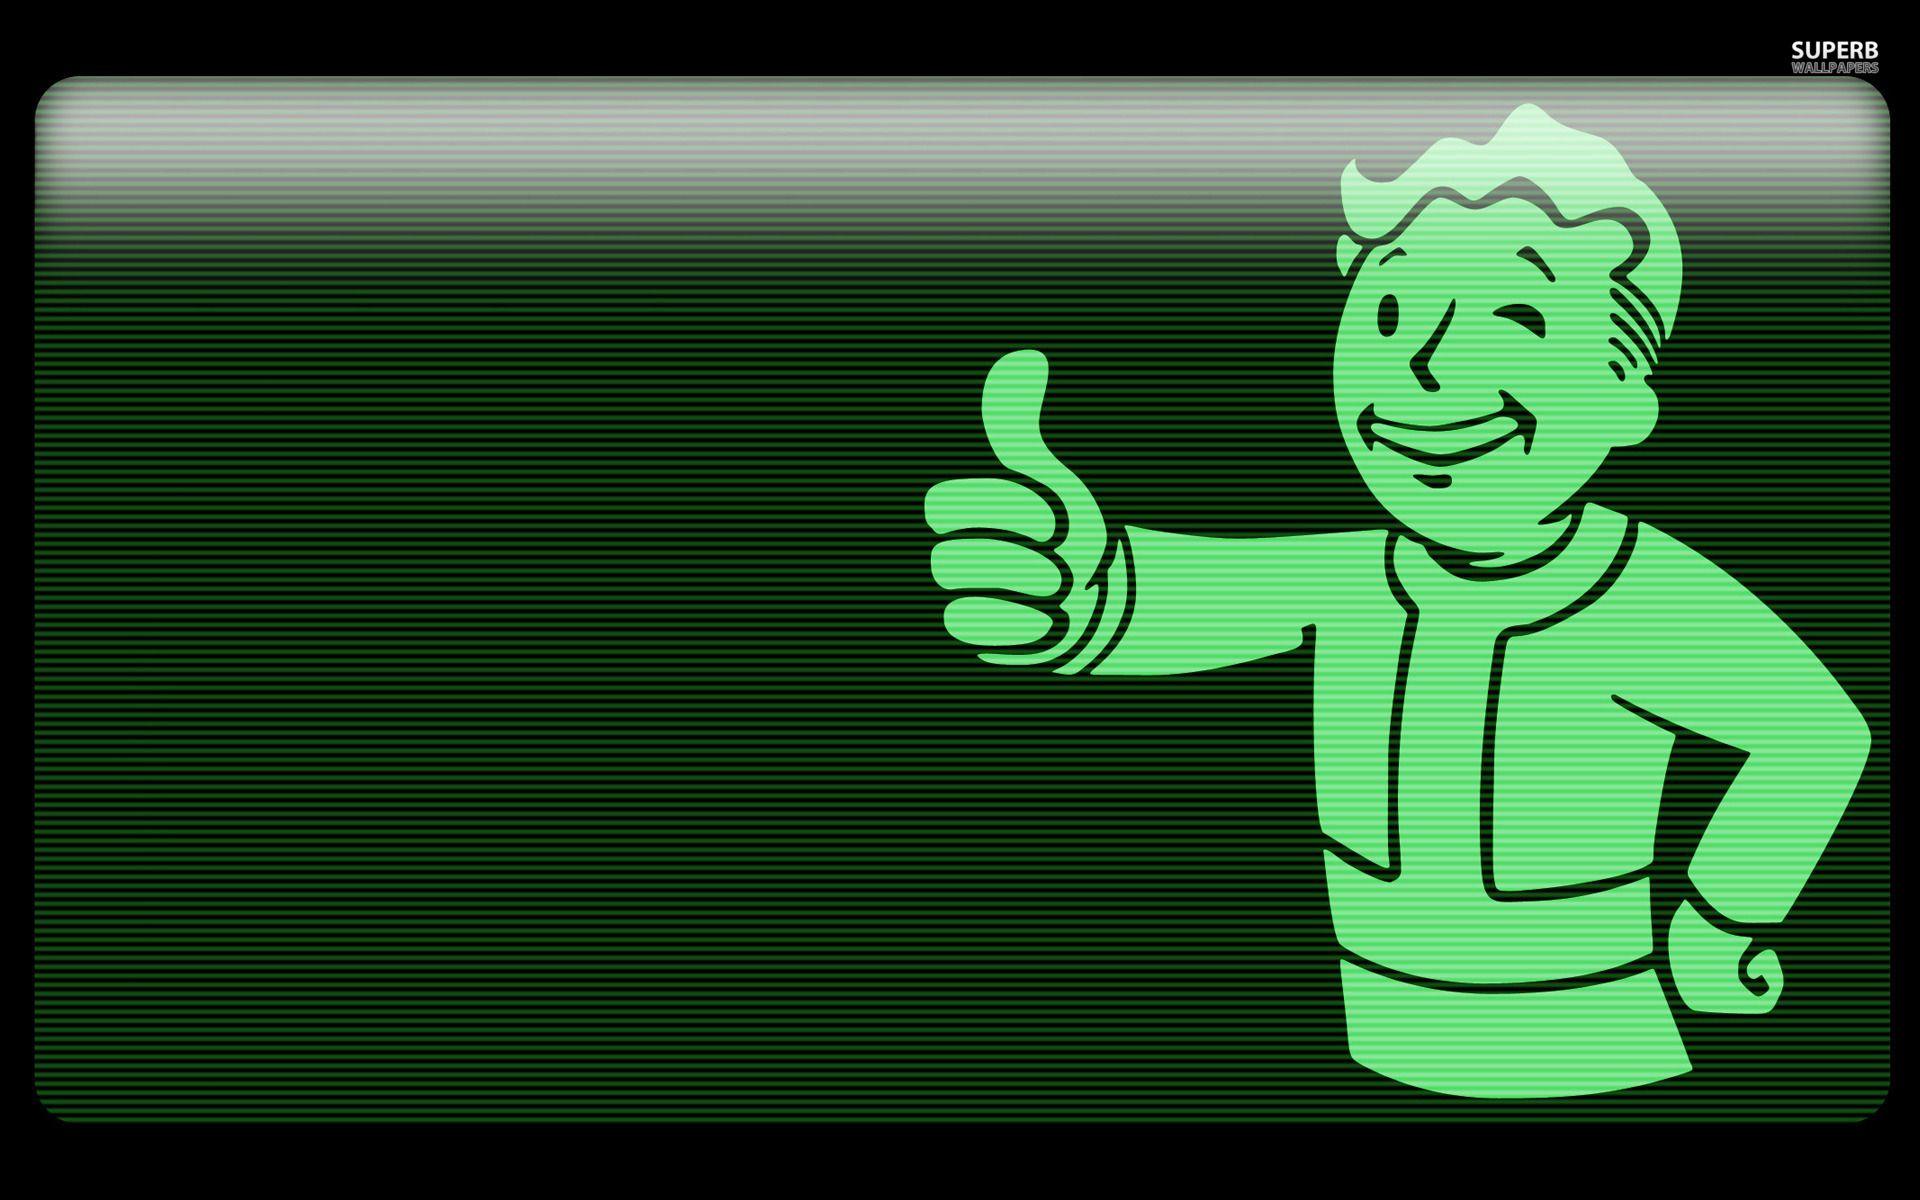 Fallout Pip Boy Iphone Wallpapers Top Free Fallout Pip Boy Iphone Backgrounds Wallpaperaccess